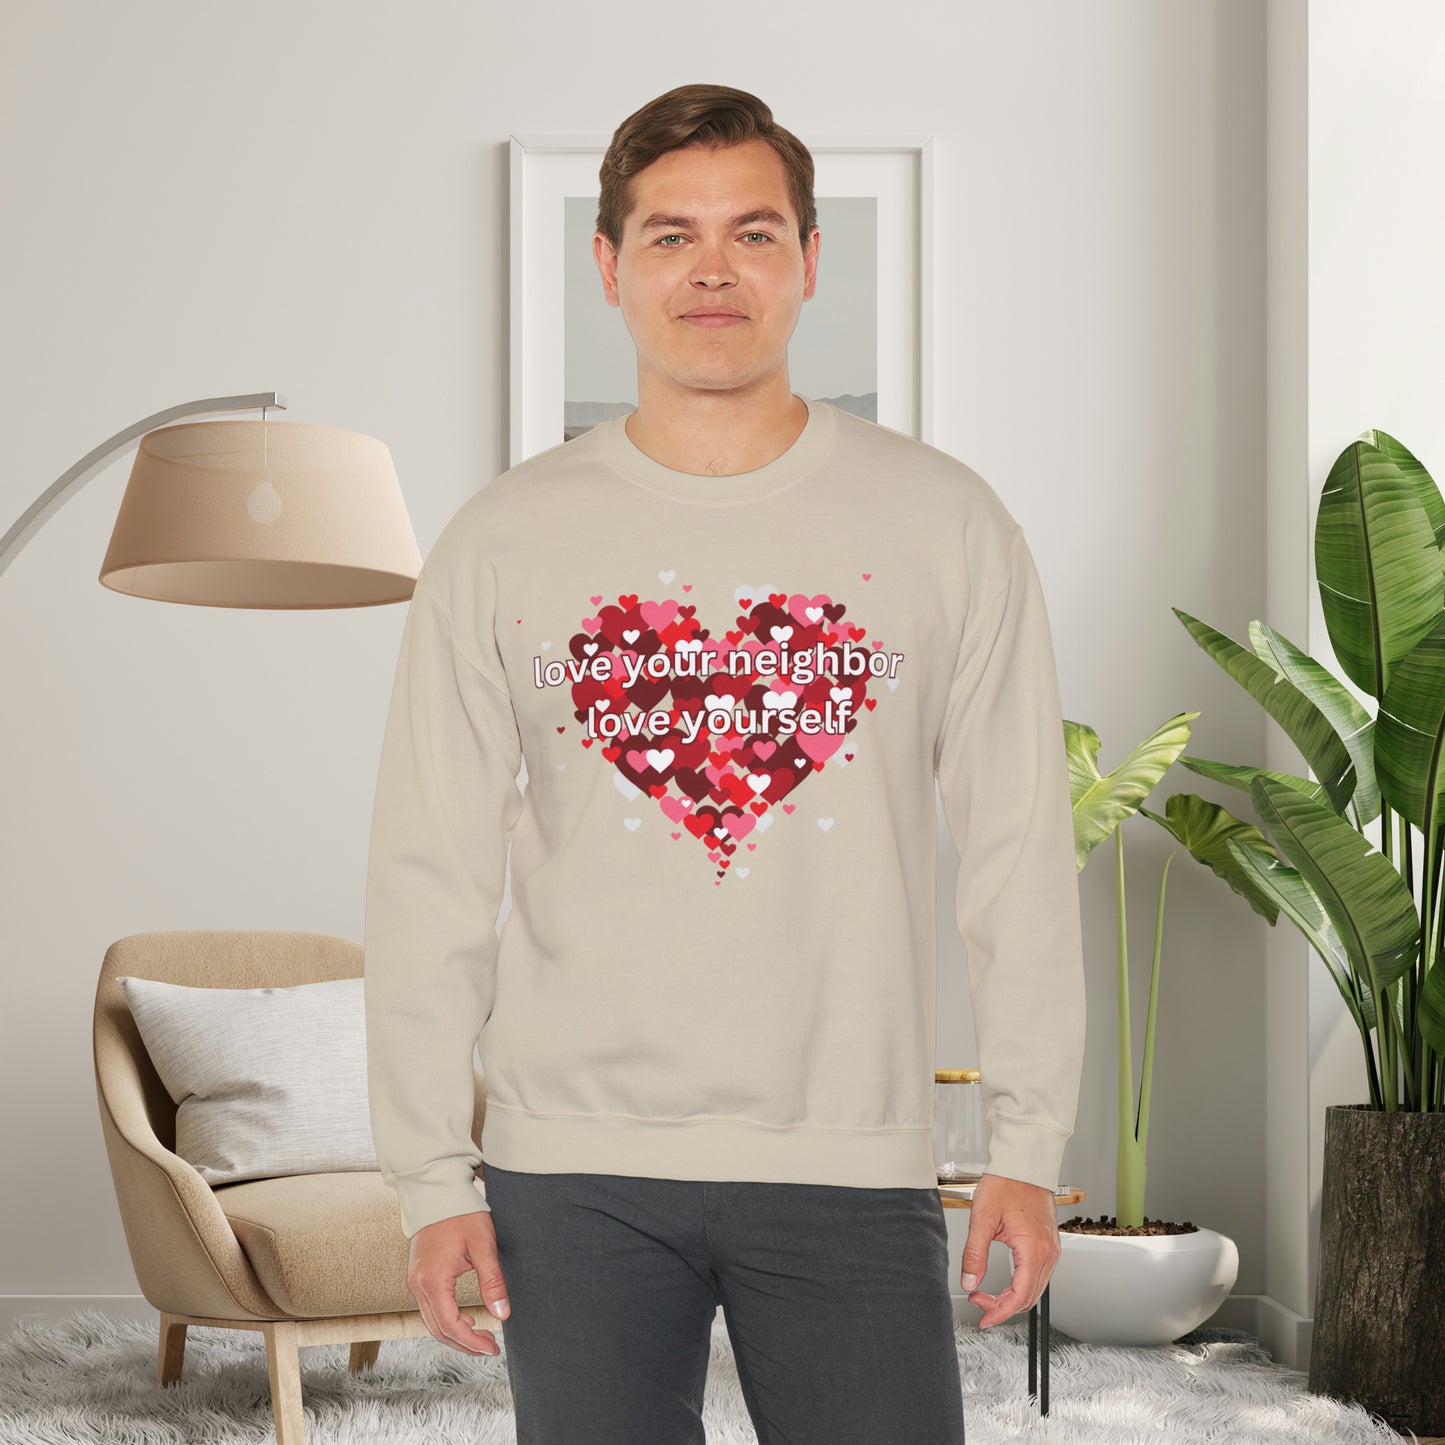 “love your neighbor love yourself” on top of a beautiful heart of hearts. Give the gift of this Unisex Heavy Blend™ Crewneck Sweatshirt or get one for yourself.